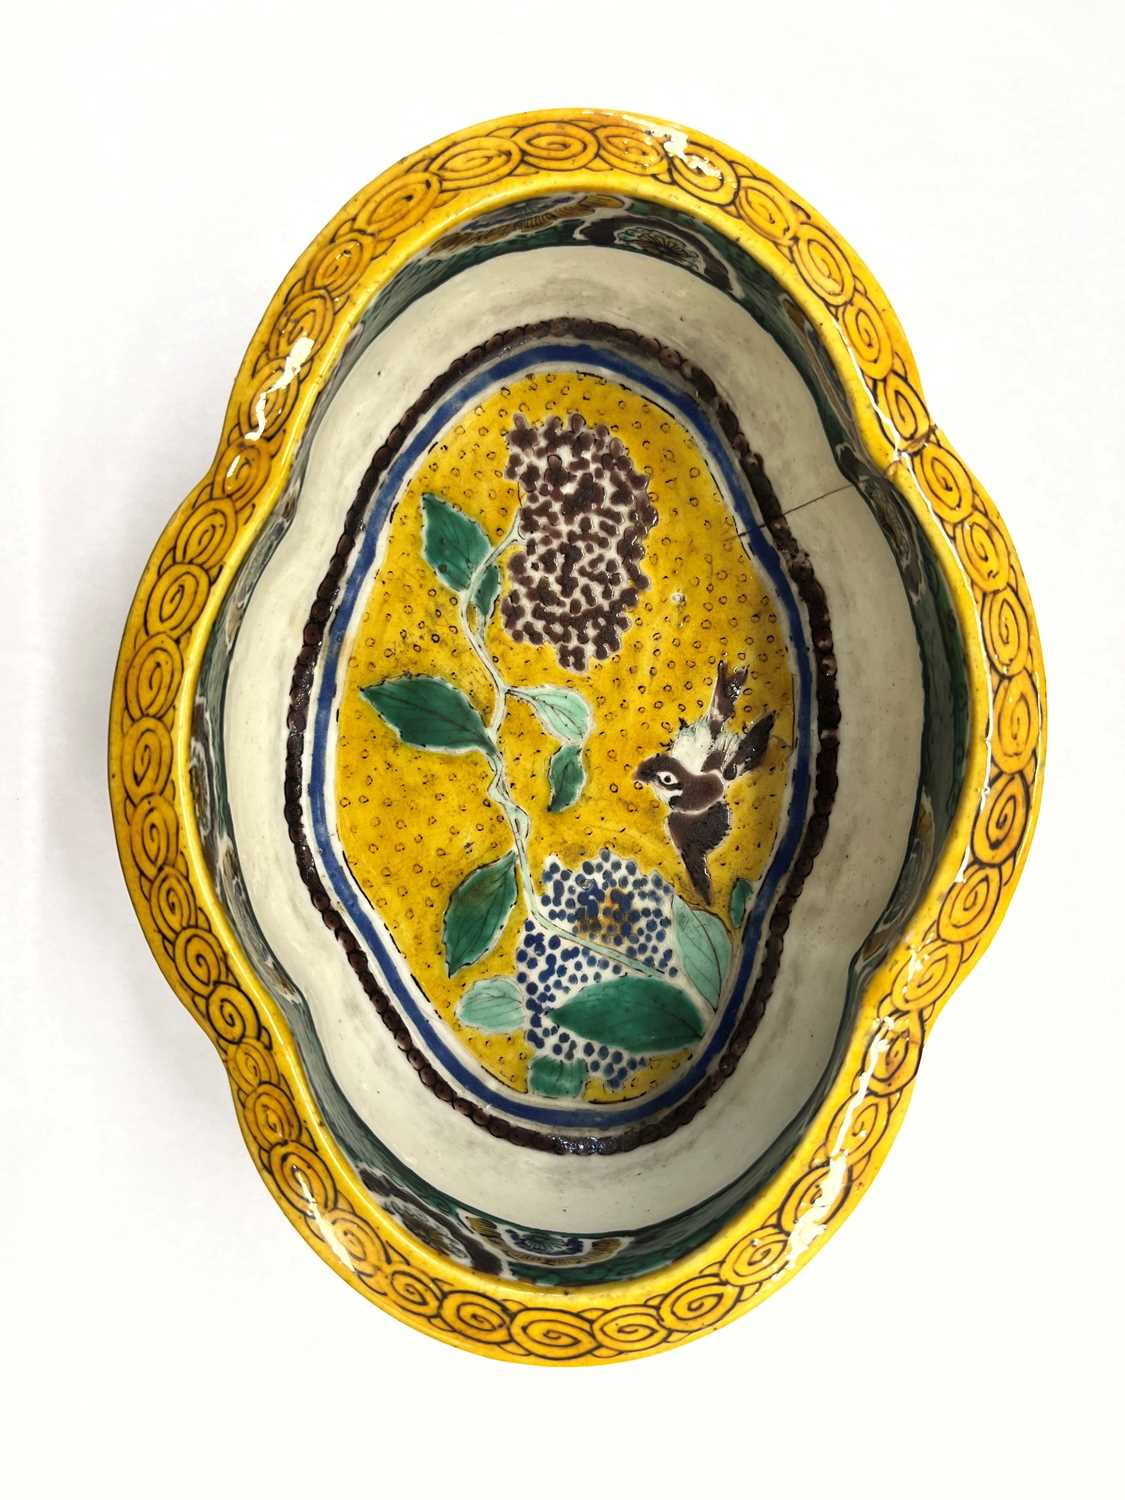 A JAPANESE KO KUTANI-STYLE QUATRELOBED FOOTED BOWL PROBABLY MEIJI, 19TH CENTURY Colourfully - Image 3 of 3